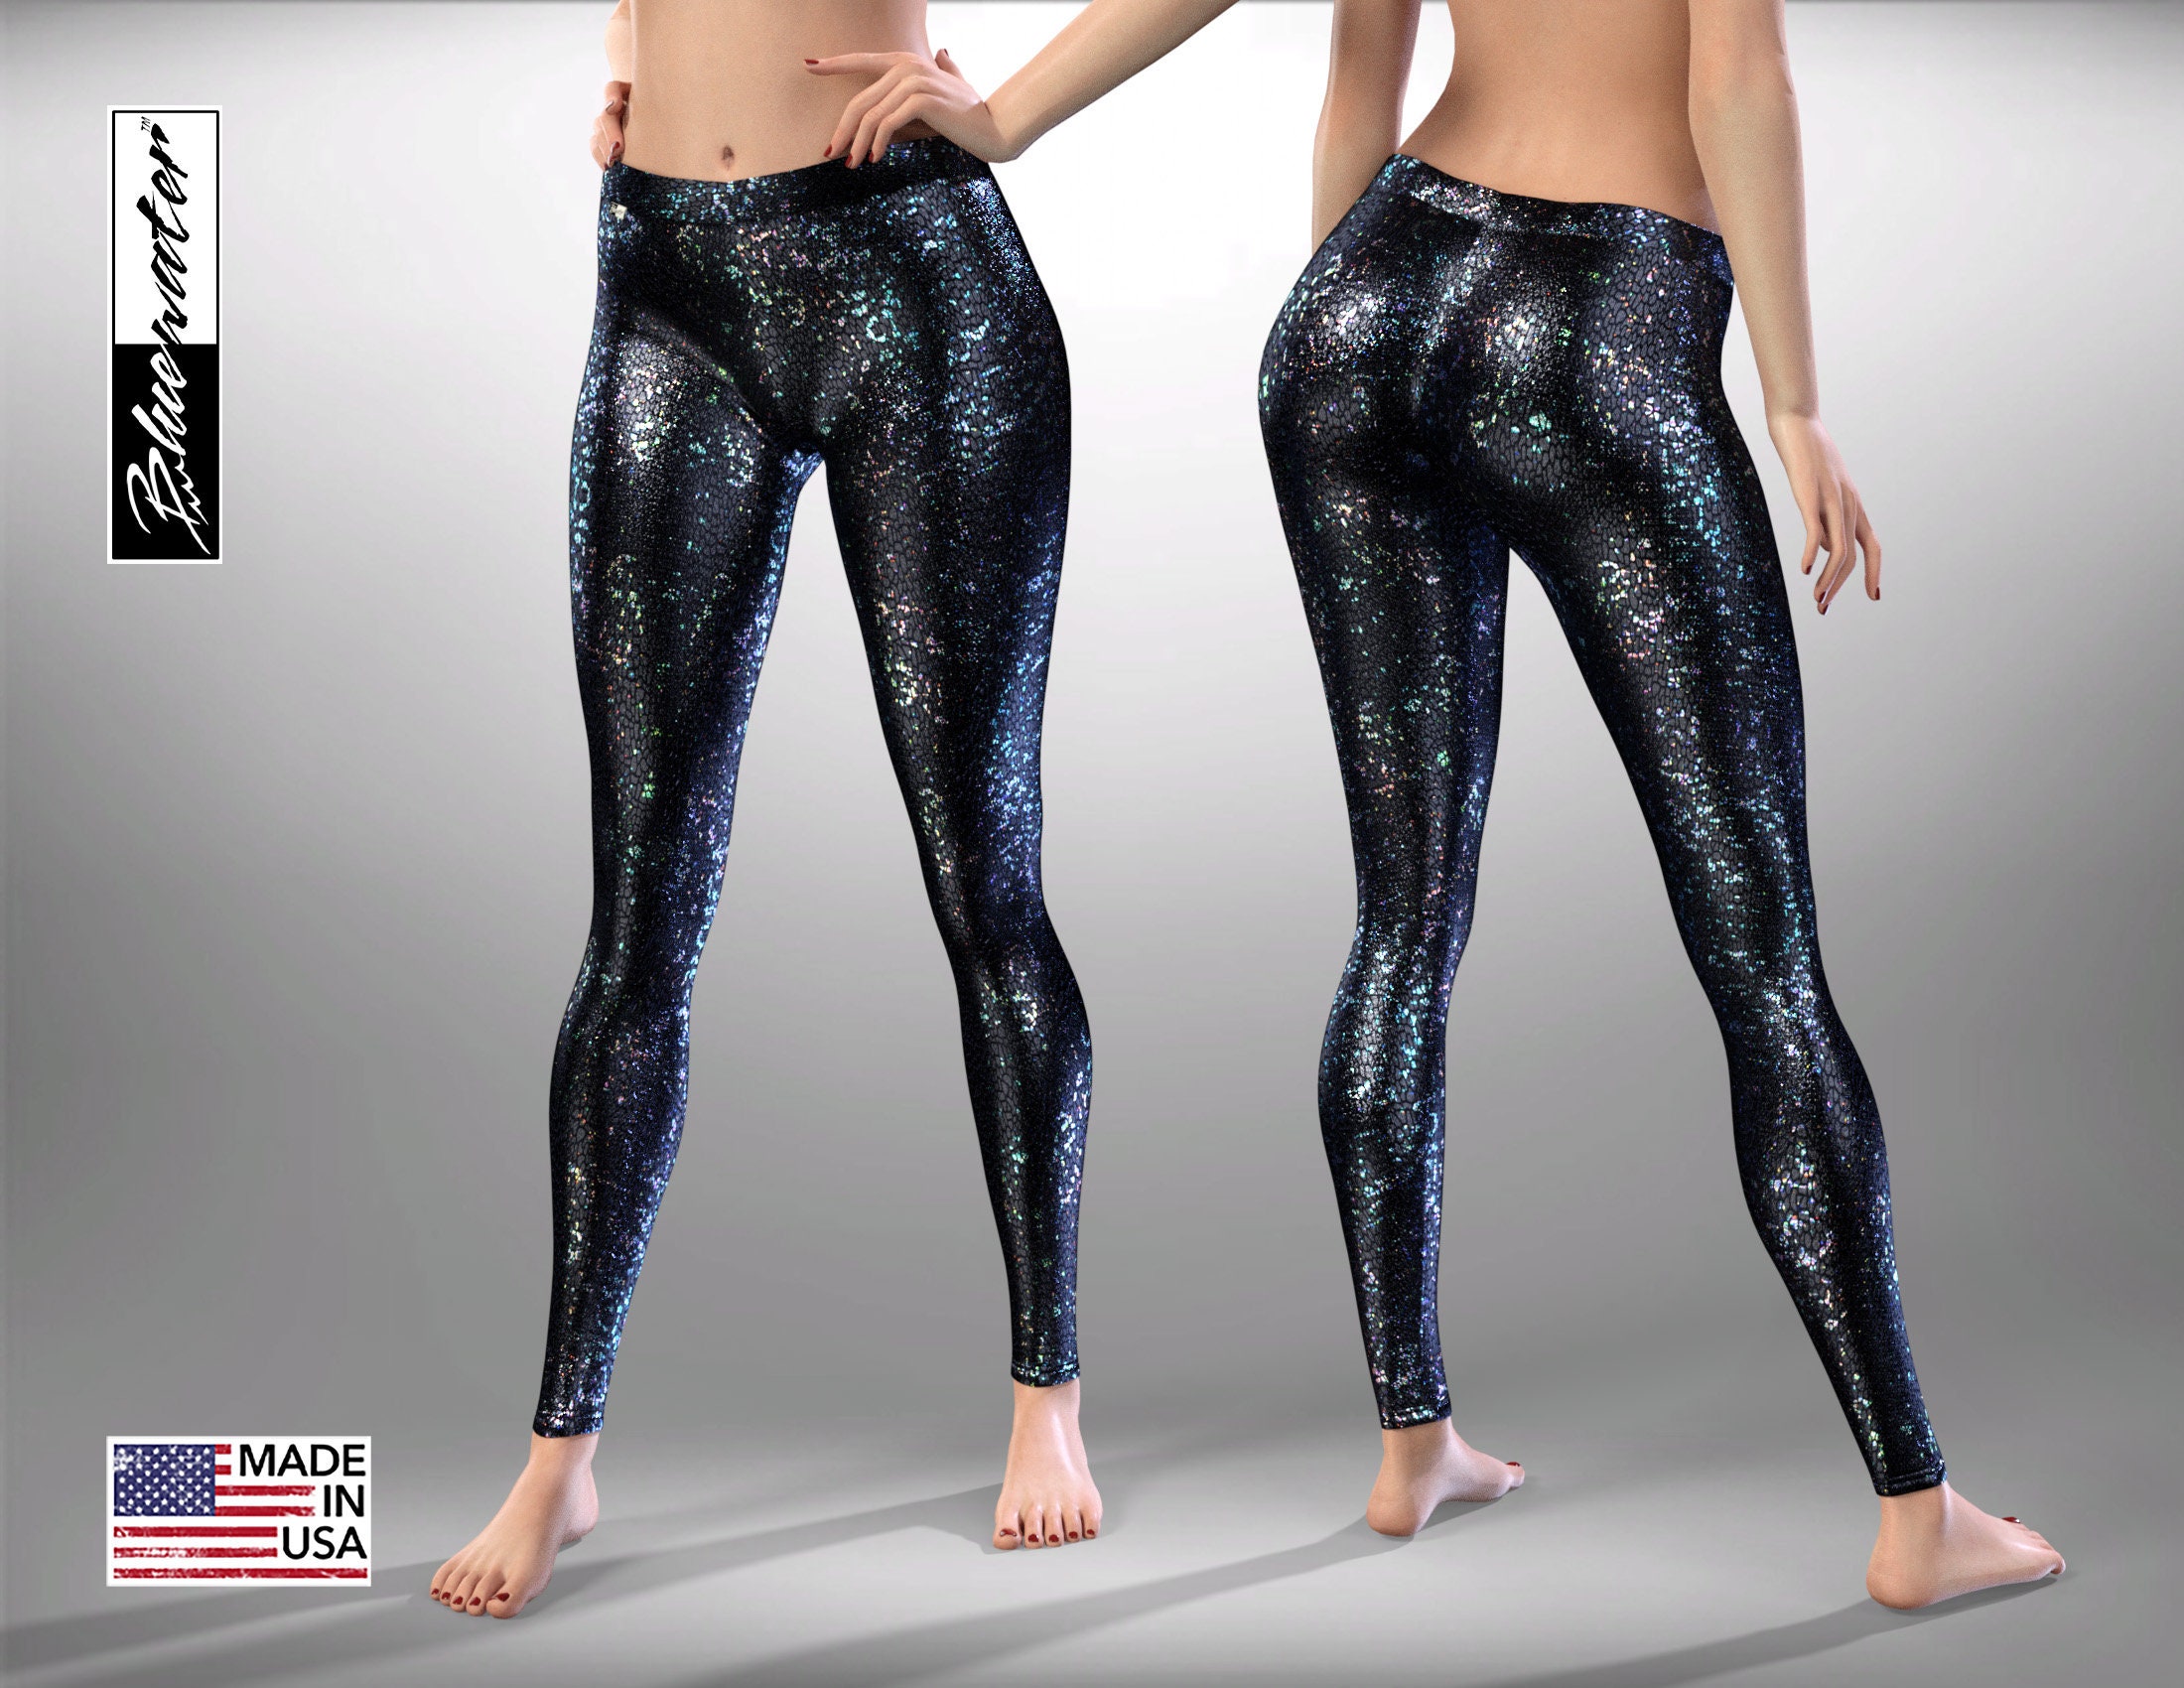 Shiny Black Spandex Leggings With Jeans Back Pockets, by LENA QUIST -   Finland